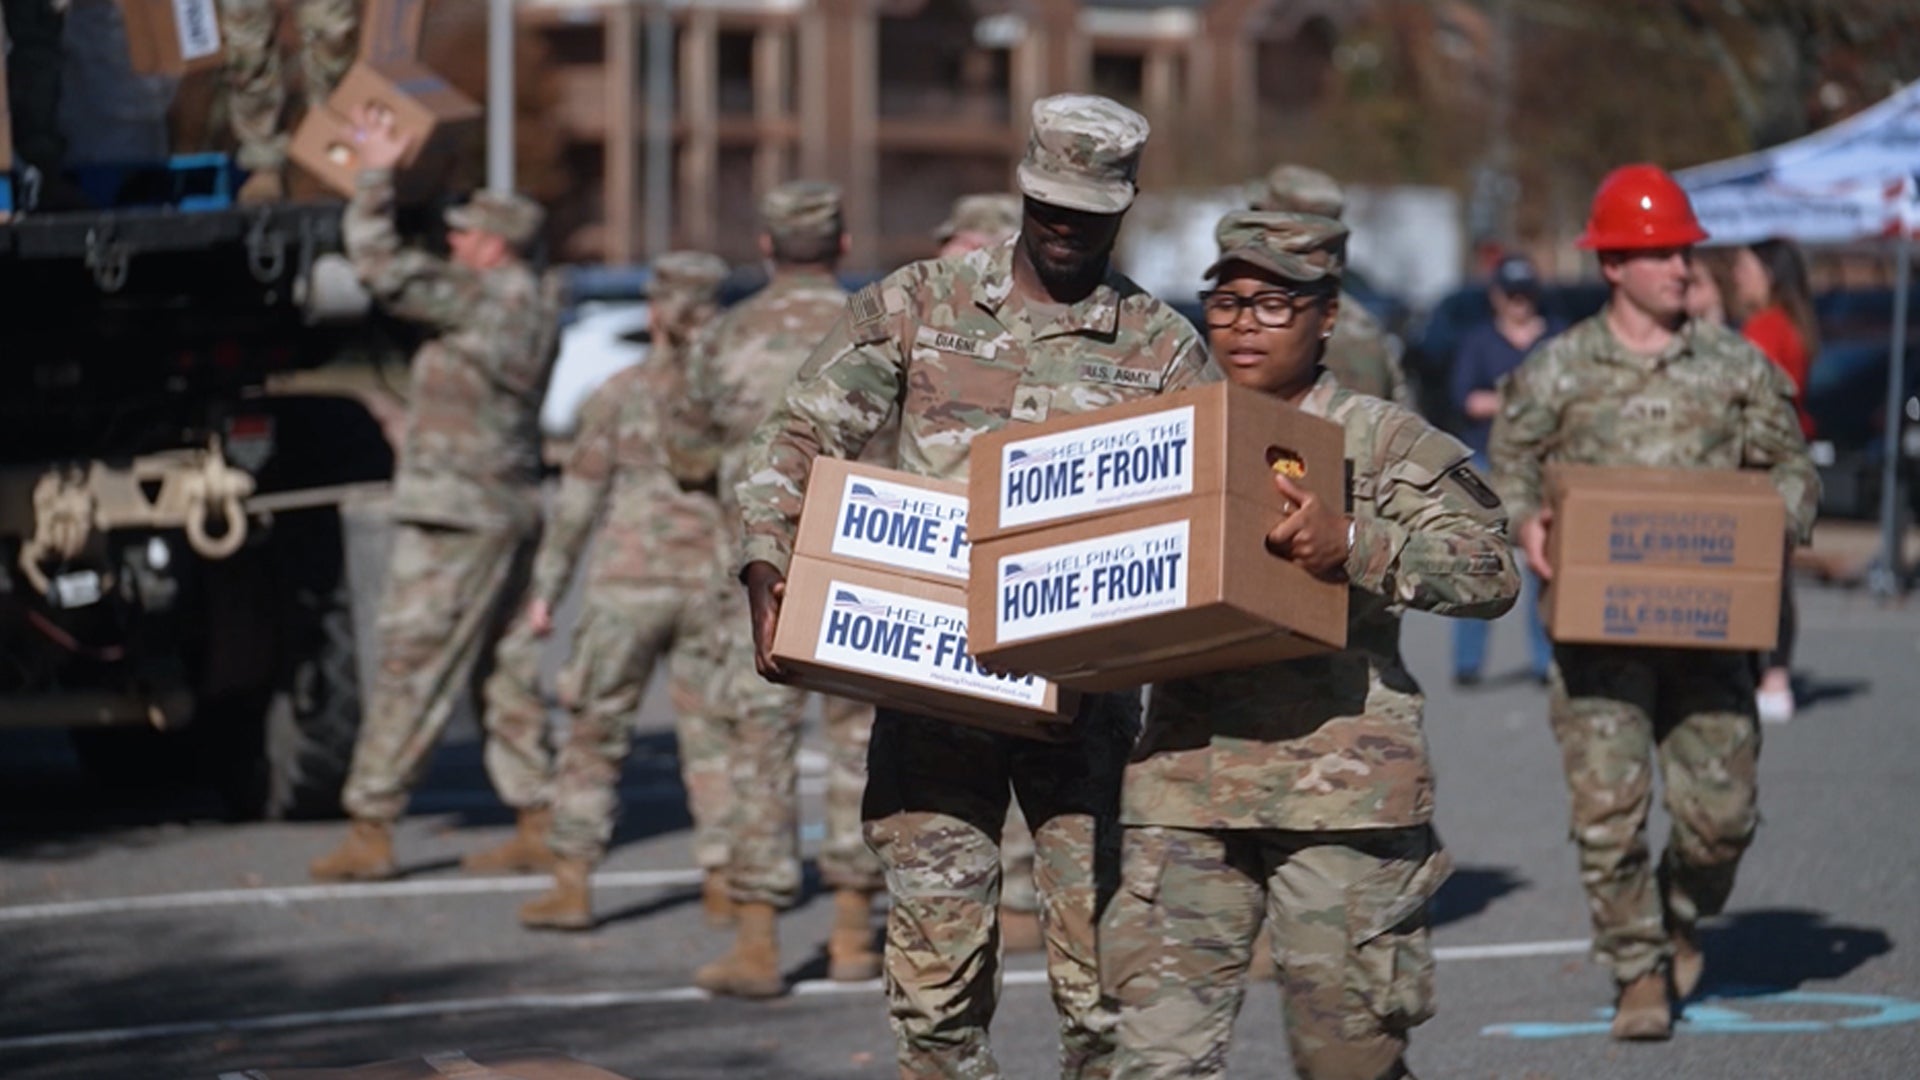 CBN’s ‘Helping the Home Front’ Serves Hundreds of Military Families at Thanksgiving